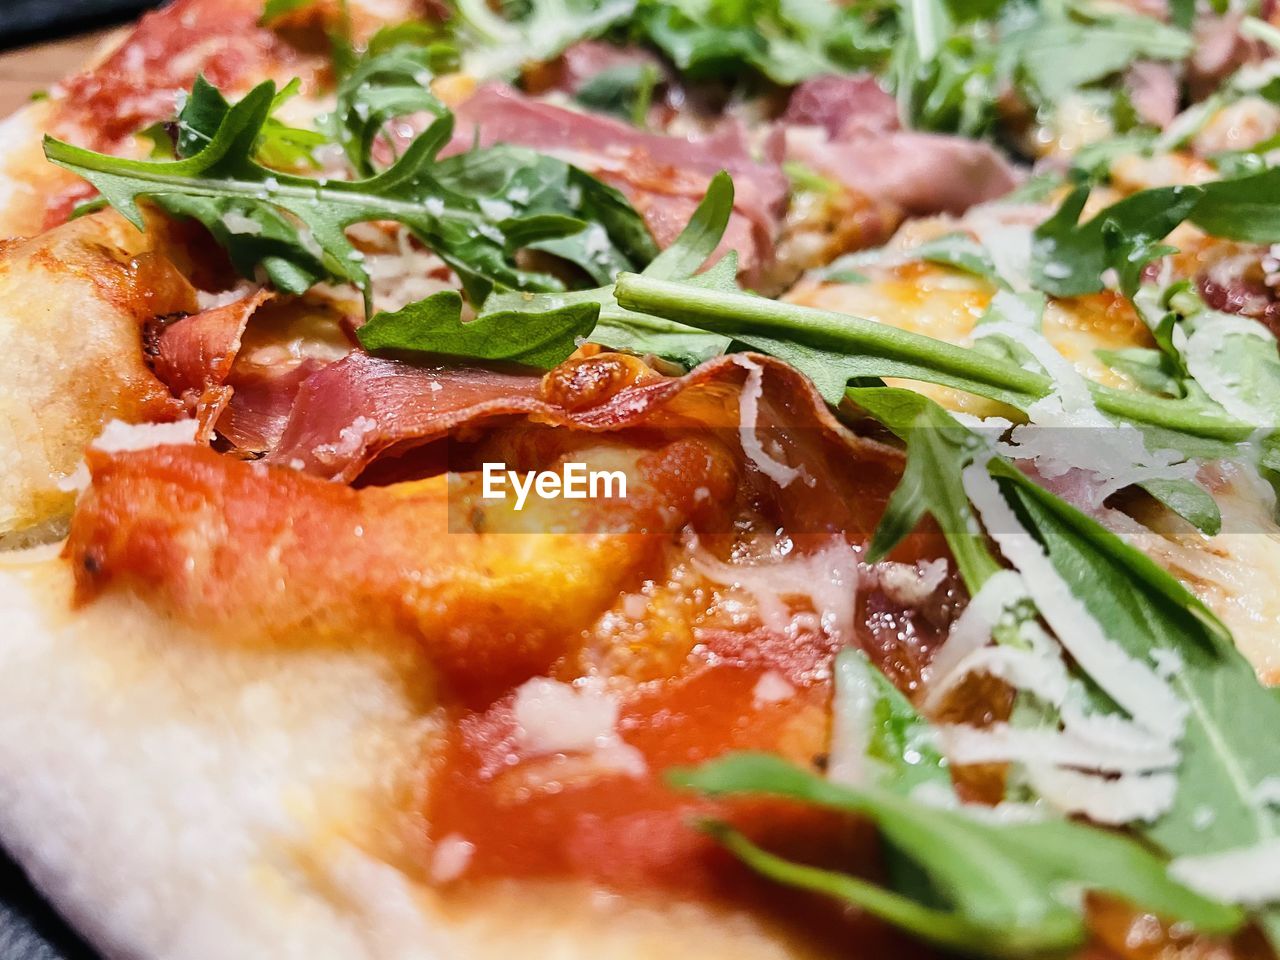 CLOSE-UP OF PIZZA SERVED ON PLATE